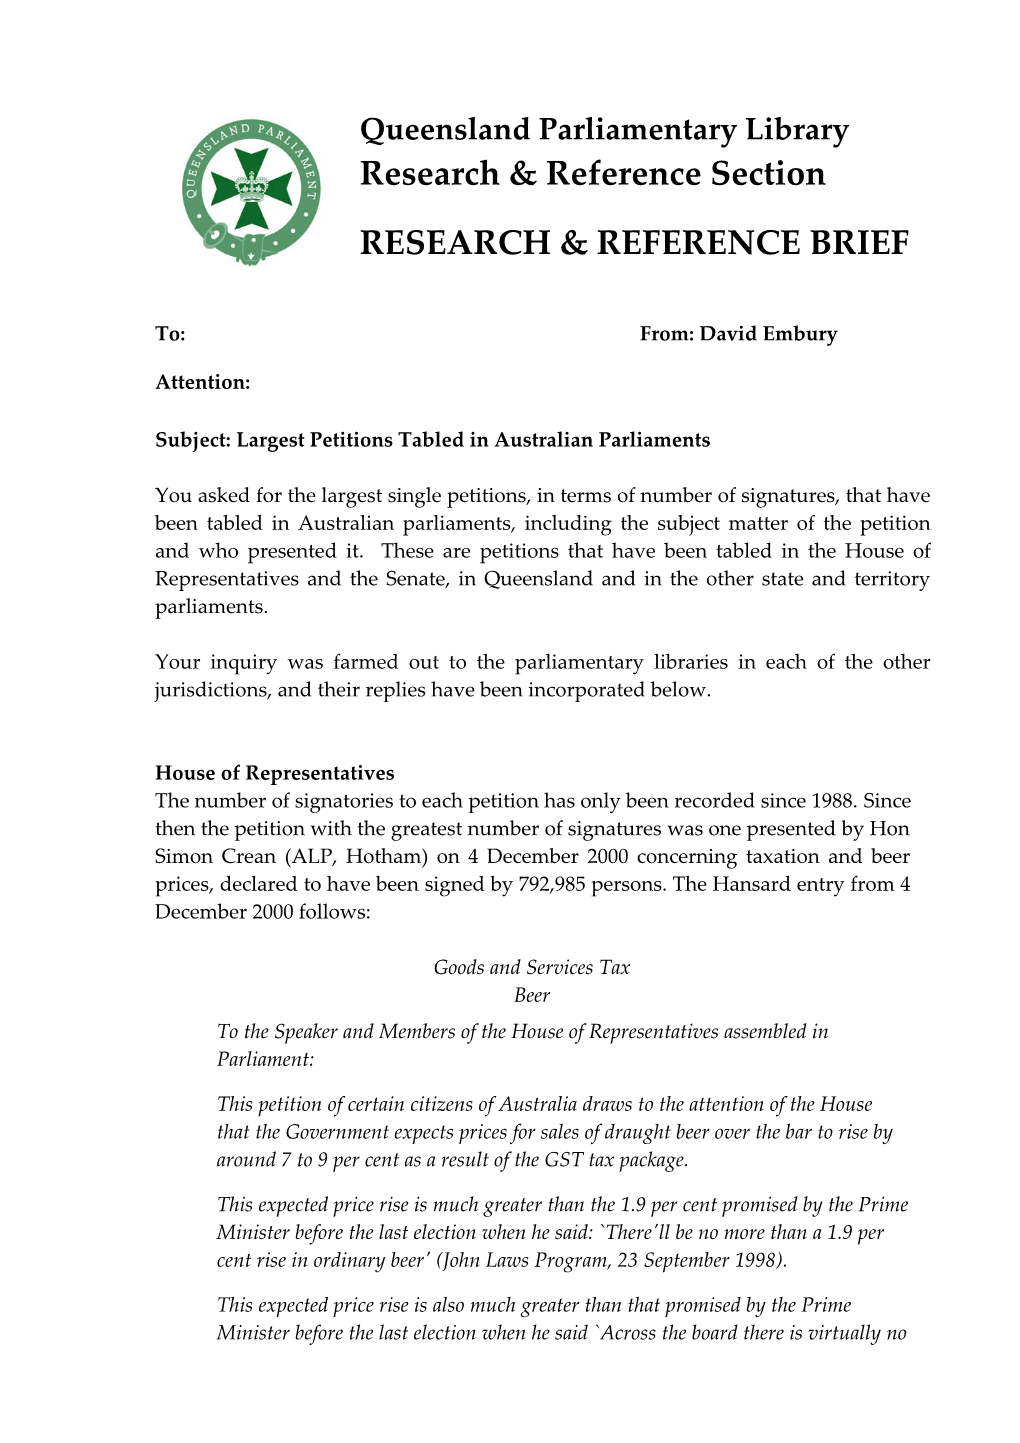 Subject: Largest Petitions Tabled in Australian Parliaments